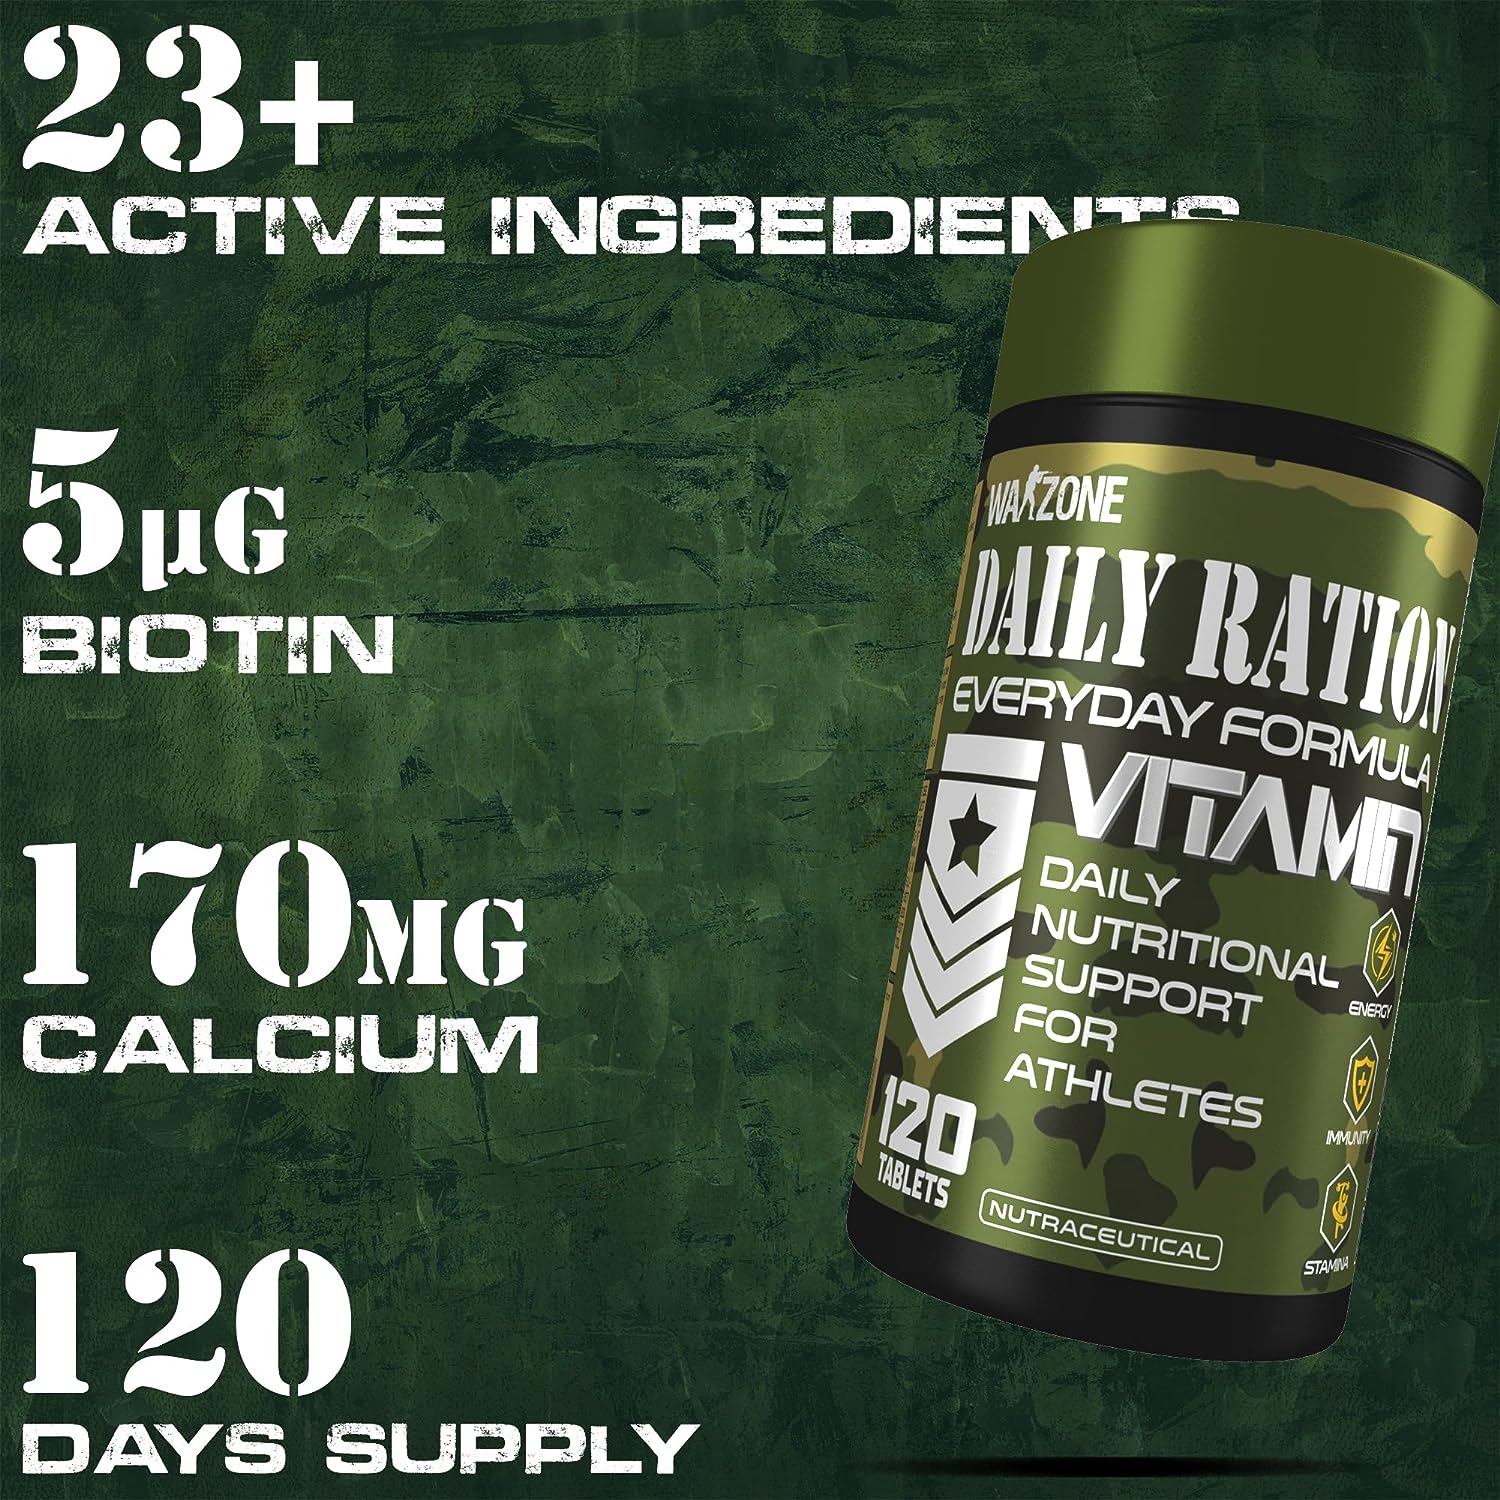 Warzone Daily Ration Men’s Multivitamin, 120 Tablets